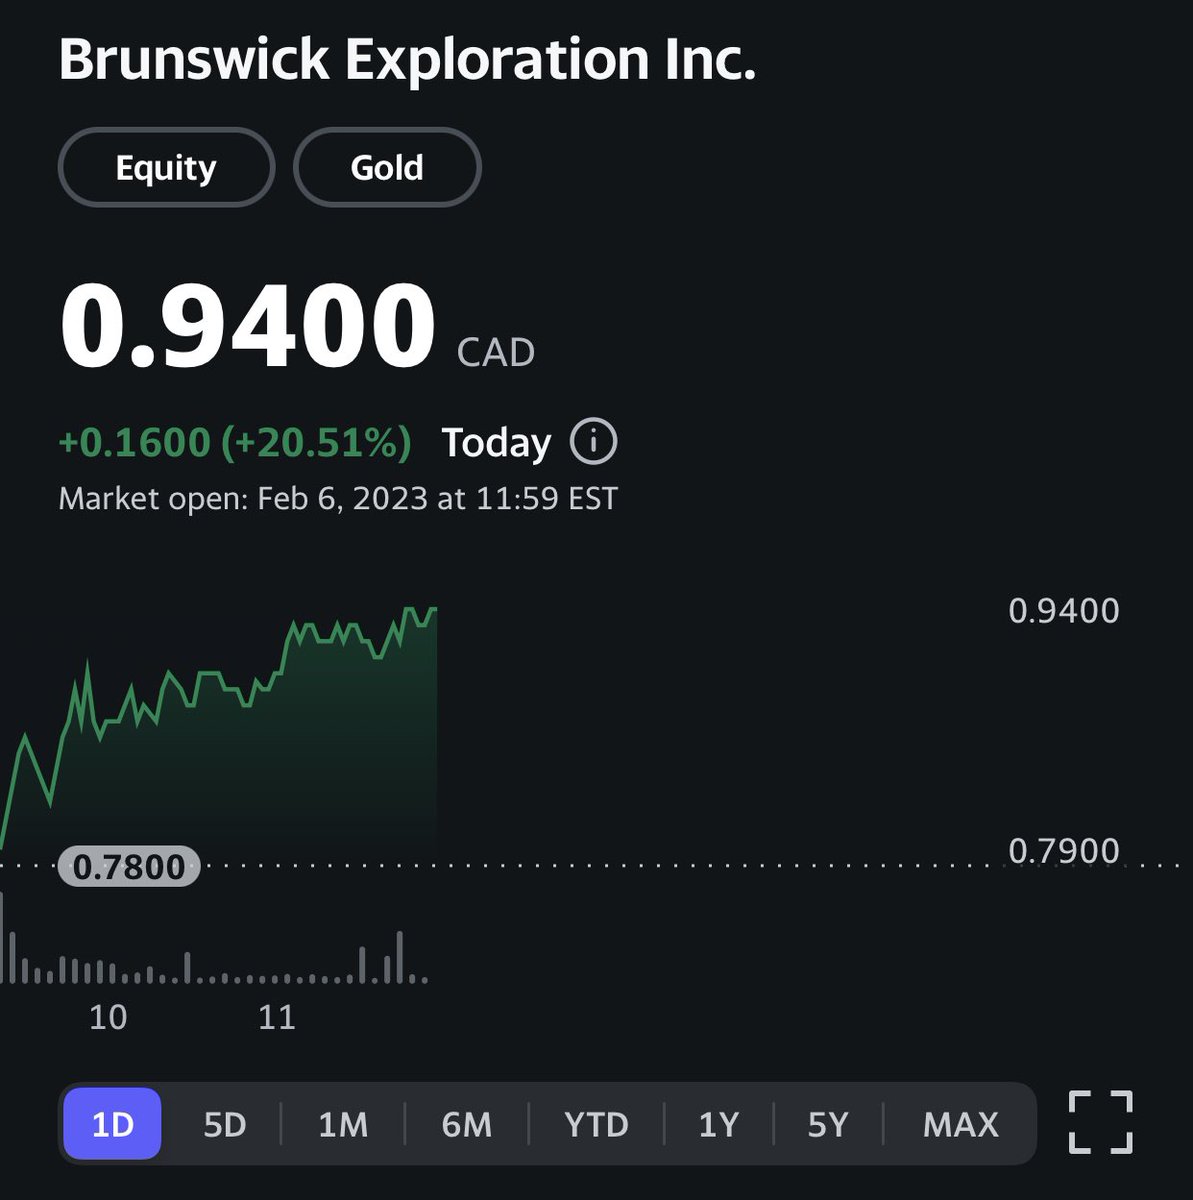 $BRW.V on fire today, at the door of some drilling announcement, hitting ATH. #lithium #mintwit #qmea https://t.co/6KCd8iG7wh